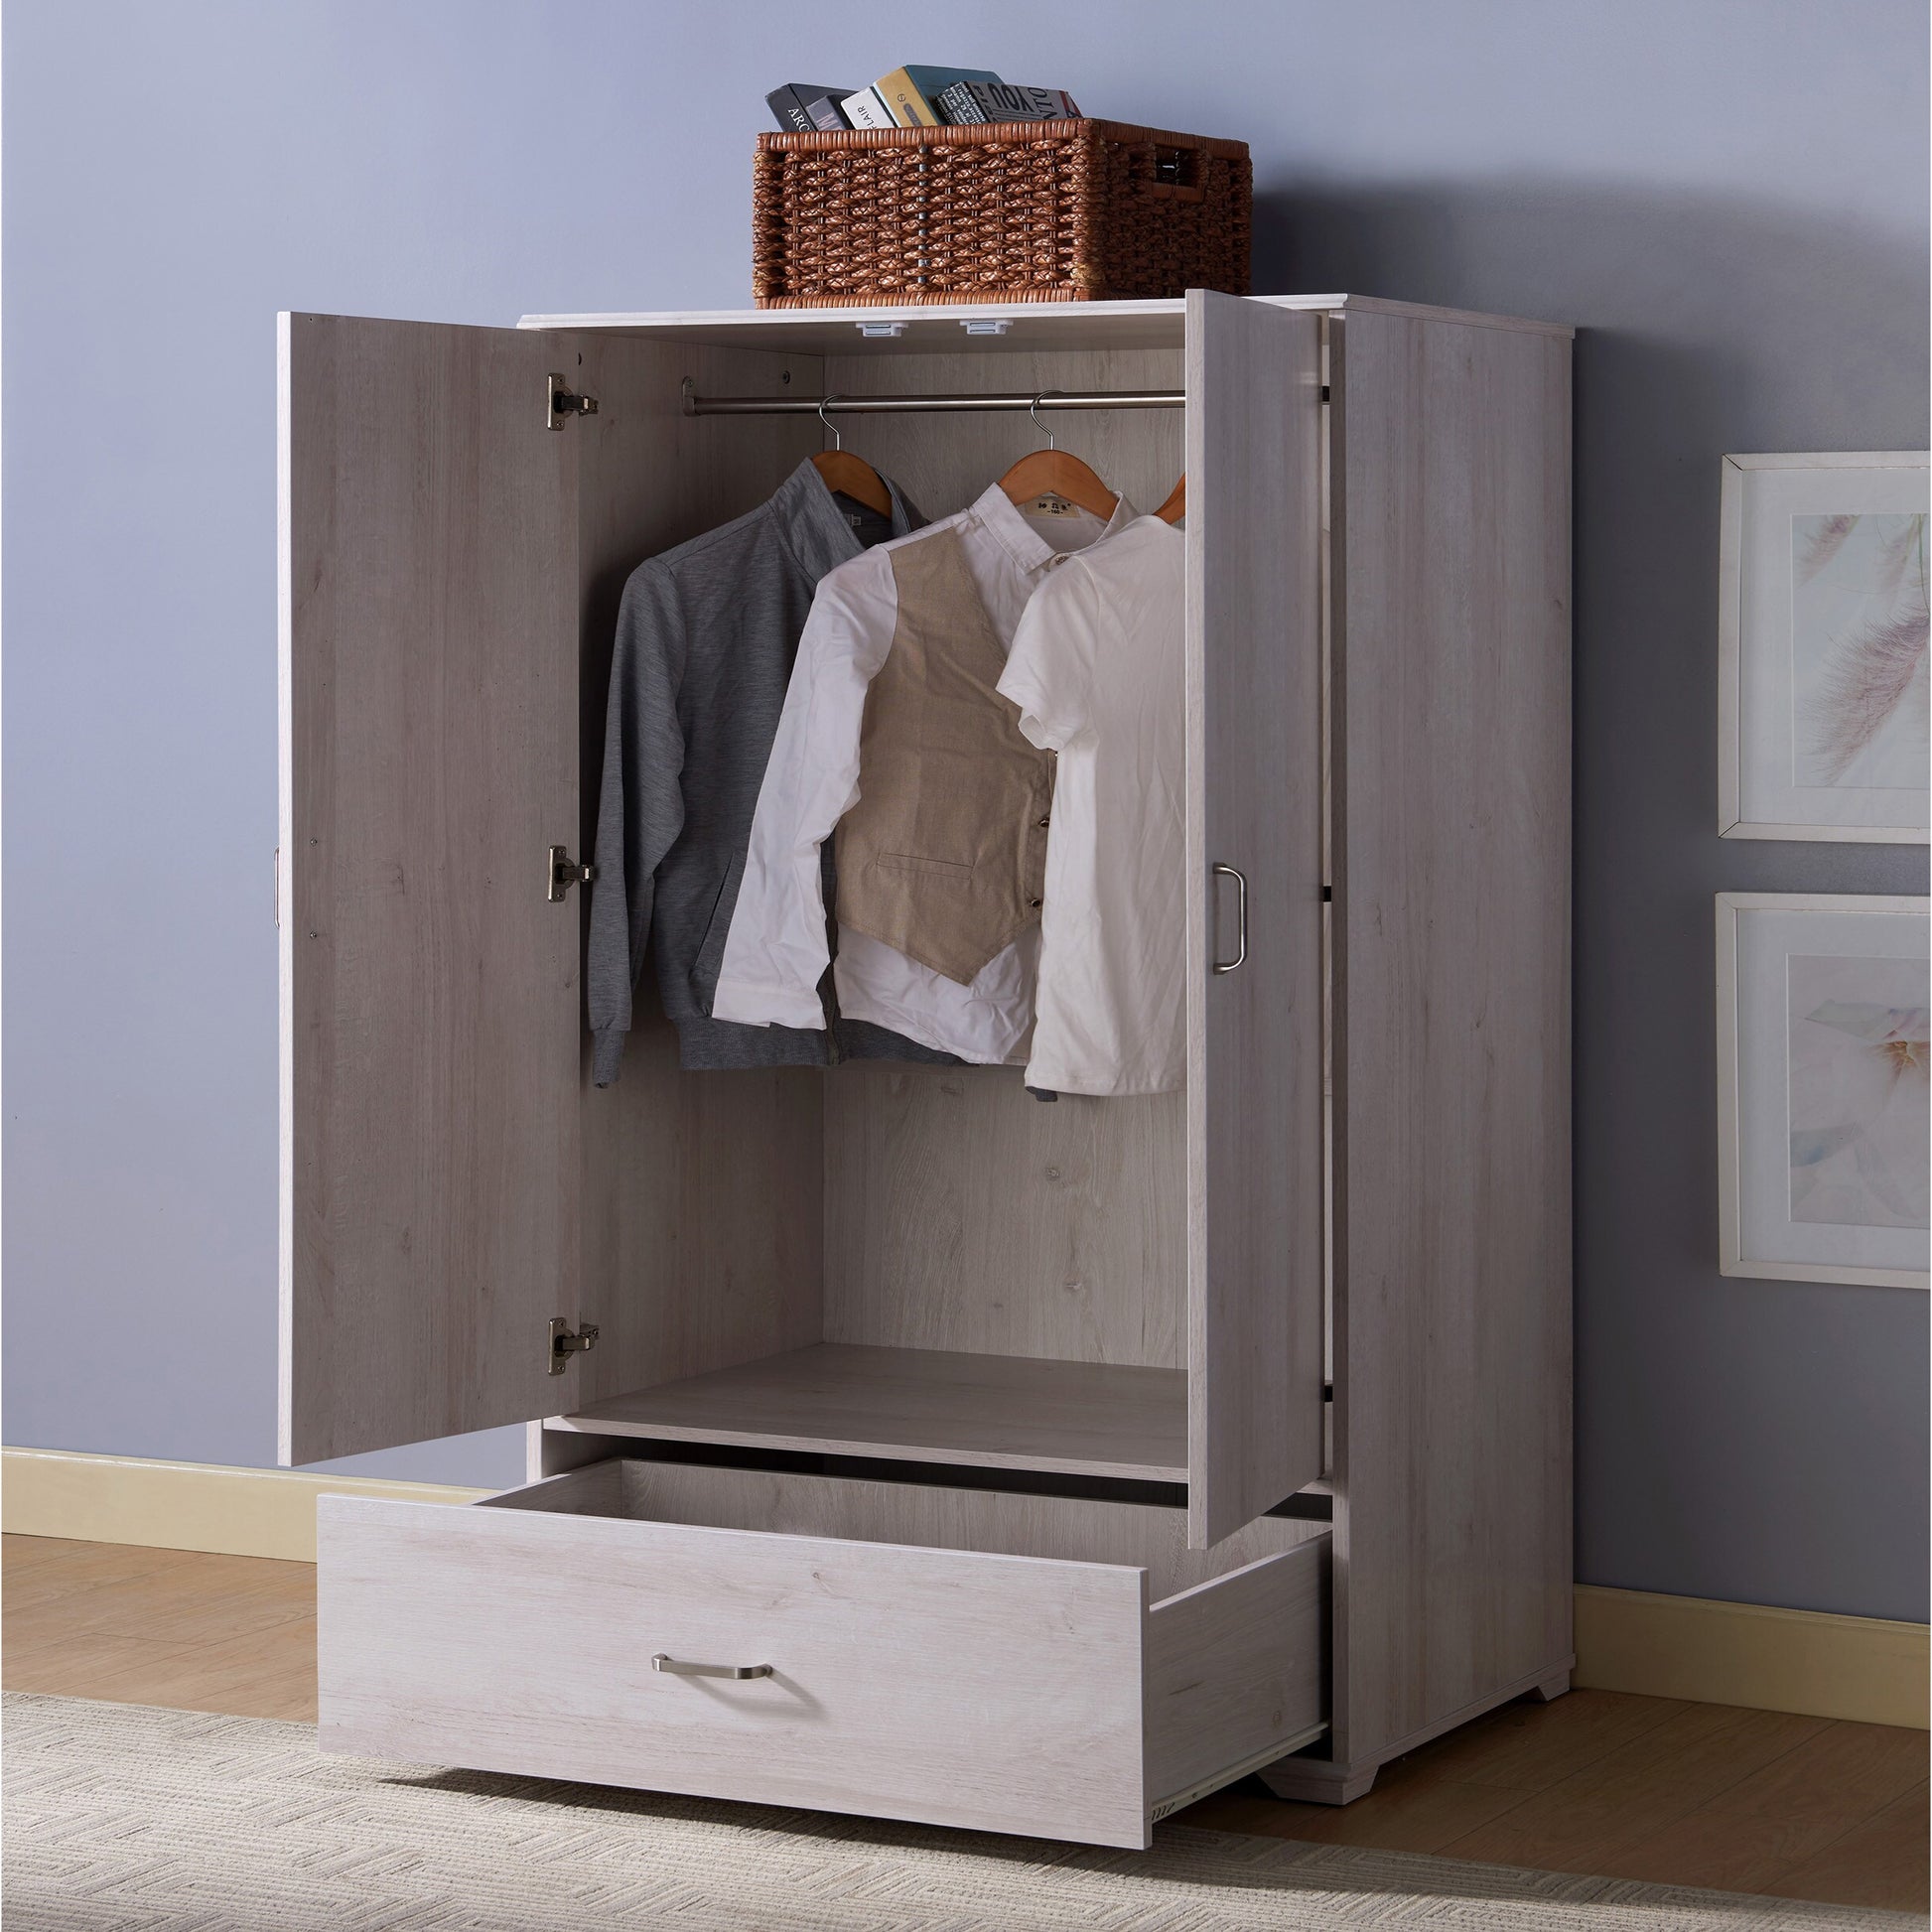 Left angled contemporary white oak two-door one-drawer wardrobe armoire with doors and drawer open with a rug and accessories